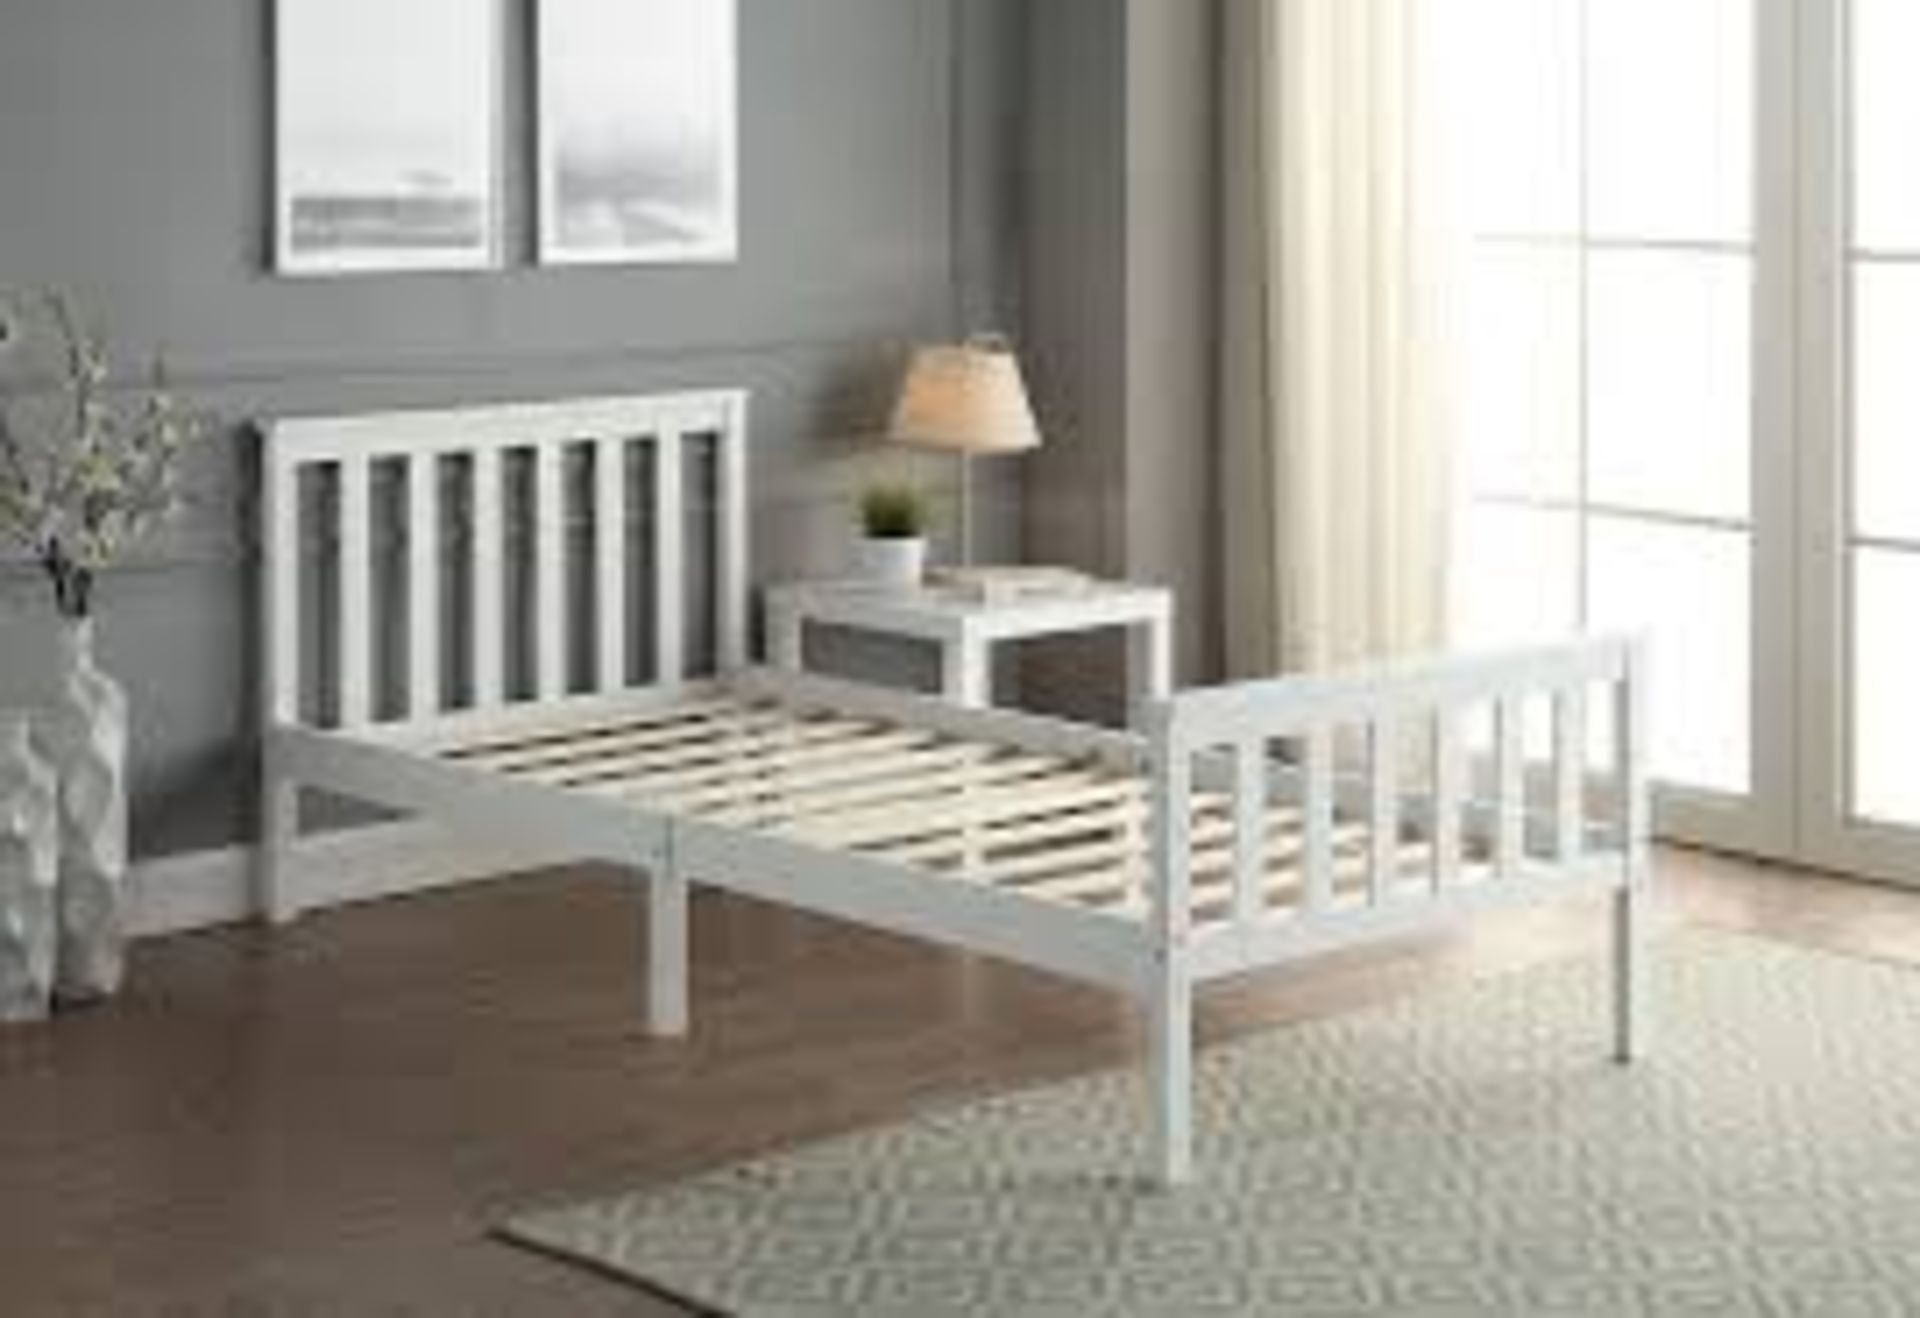 dSingle Bed Frame White Solid Wood In White . - R13a.13.